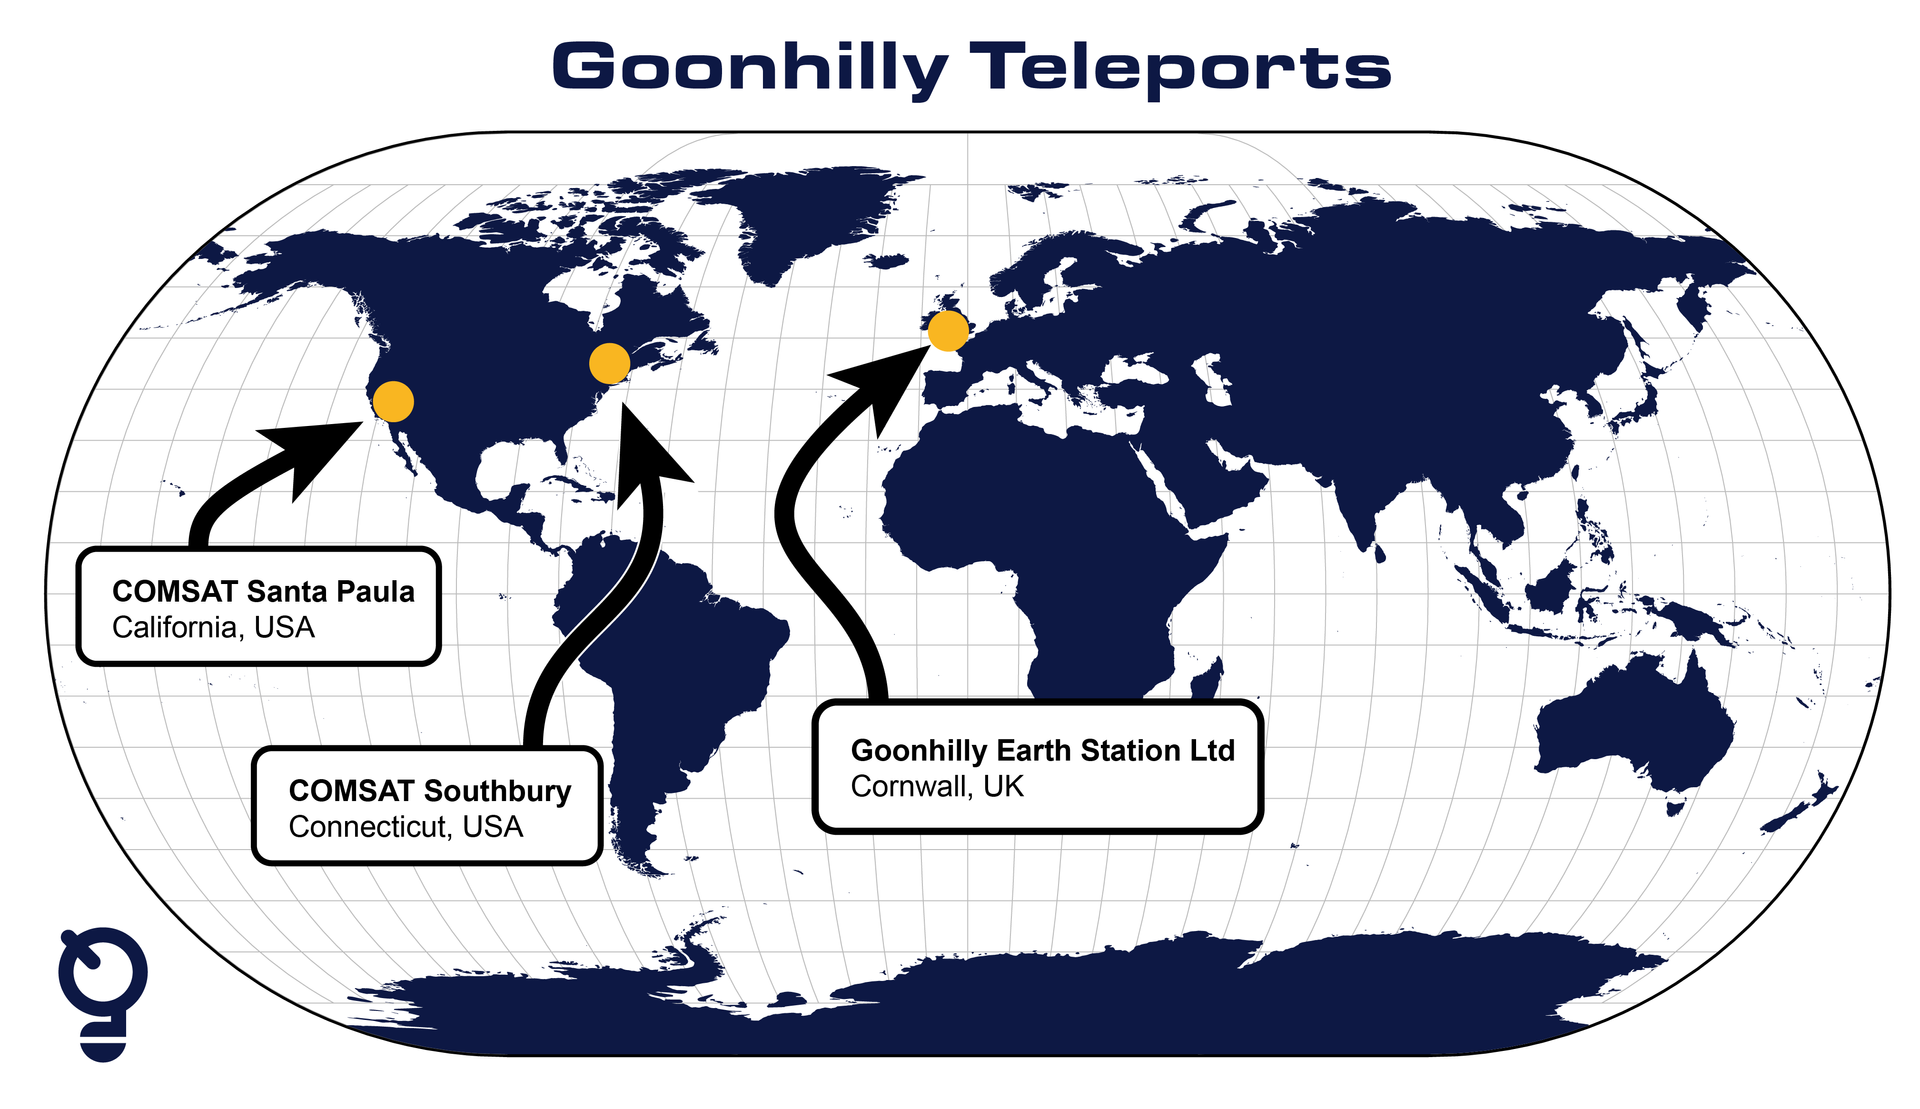 Image of Goonhilly's Teleports on a world map